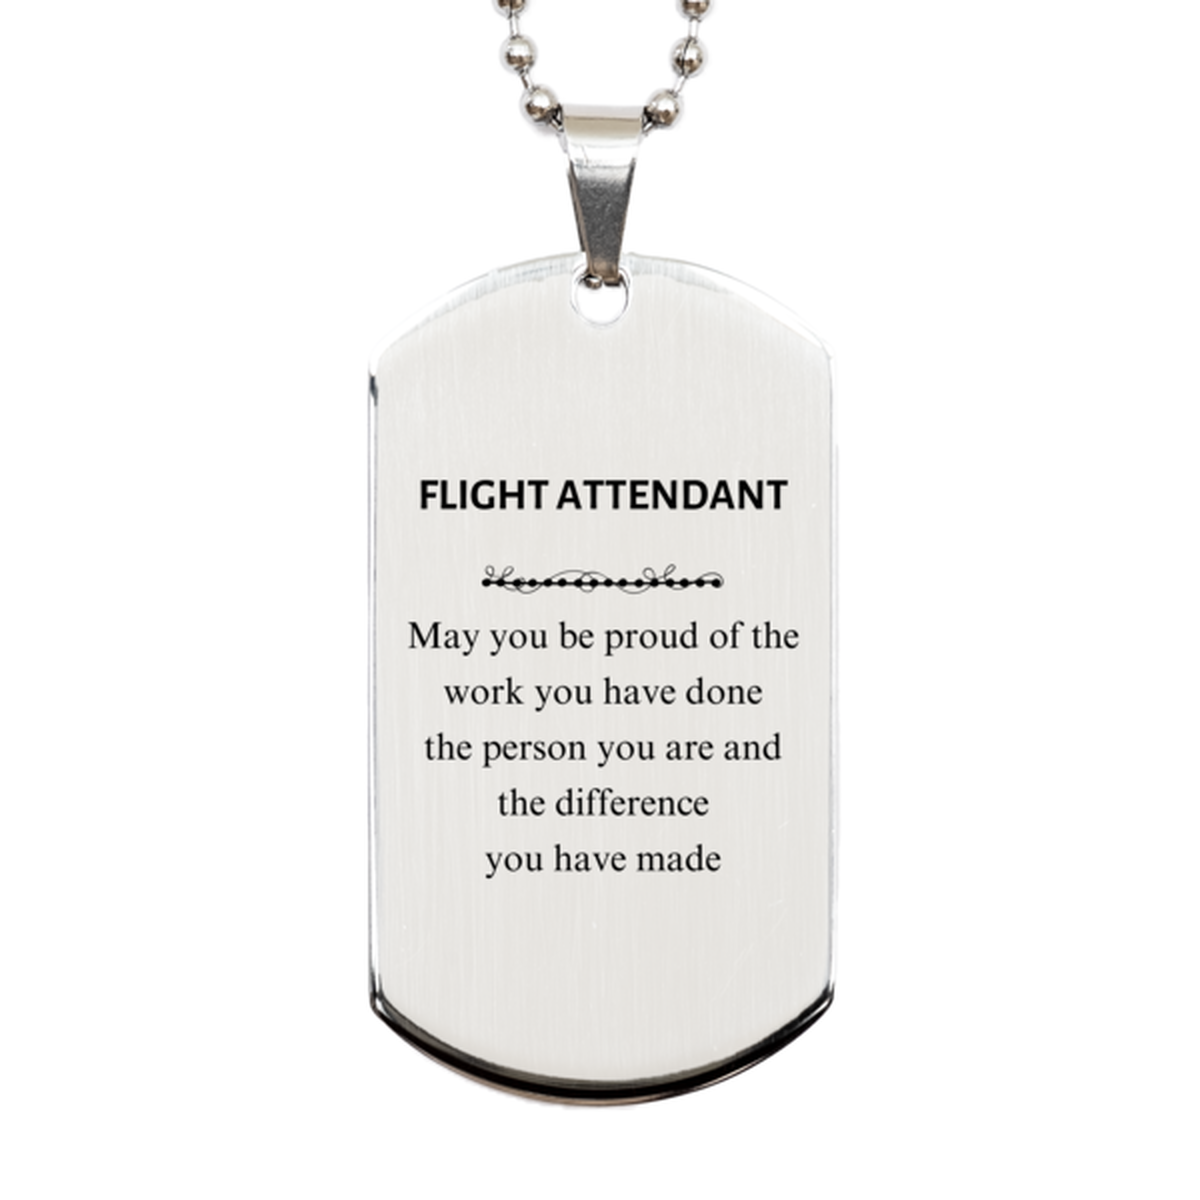 Flight Attendant May you be proud of the work you have done, Retirement Flight Attendant Silver Dog Tag for Colleague Appreciation Gifts Amazing for Flight Attendant